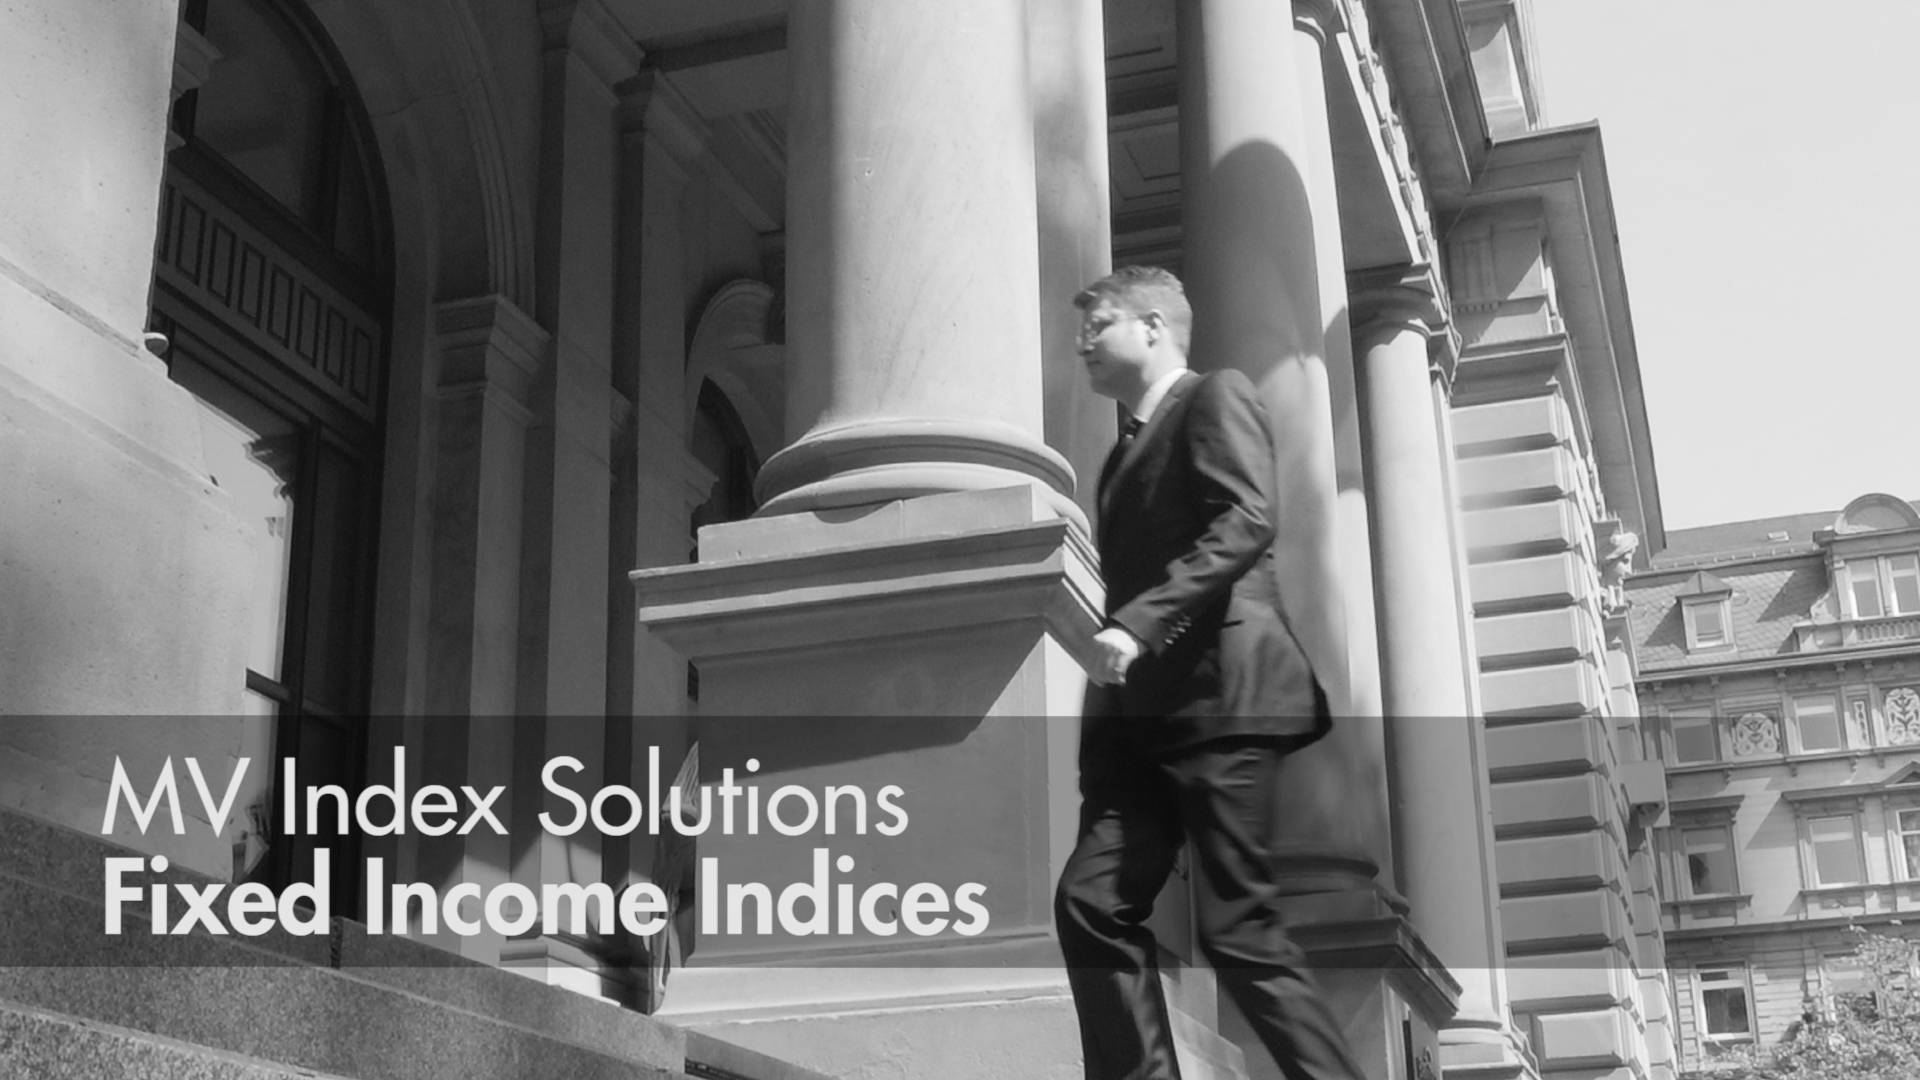 Video: MVIS Fixed Income Indices